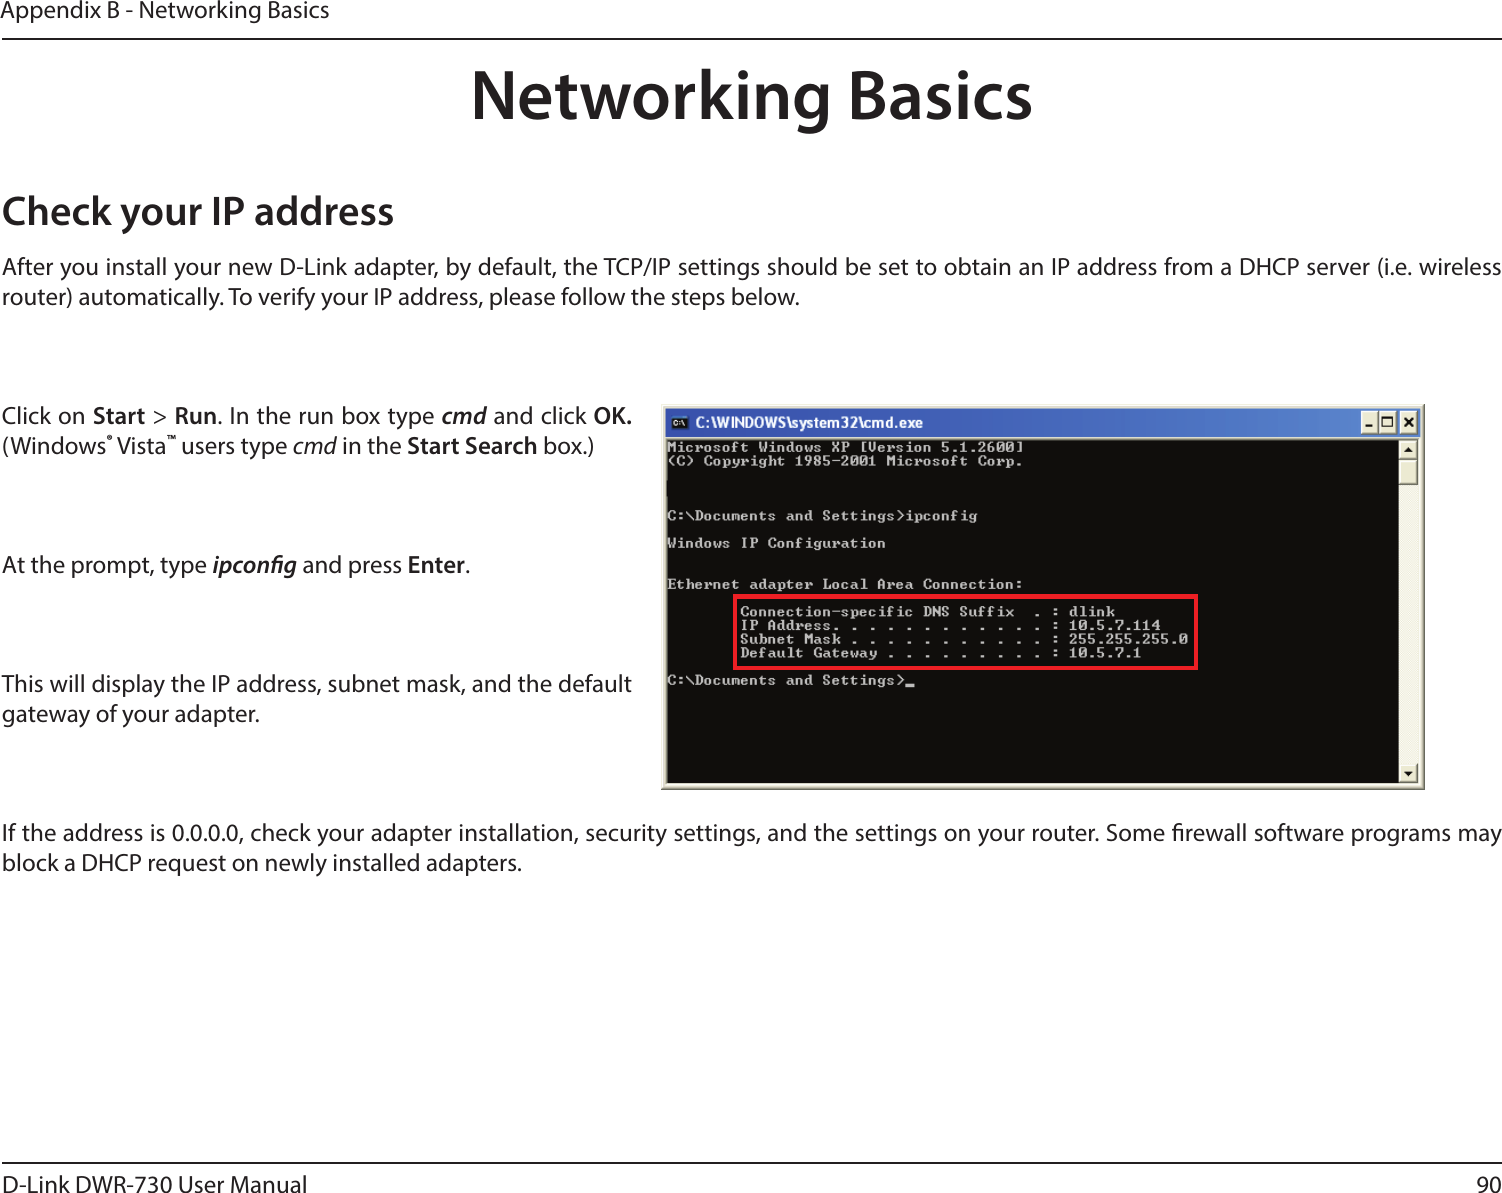 90D-Link DWR-730 User ManualAppendix B - Networking BasicsNetworking BasicsCheck your IP addressAfter you install your new D-Link adapter, by default, the TCP/IP settings should be set to obtain an IP address from a DHCP server (i.e. wireless router) automatically. To verify your IP address, please follow the steps below.Click on Start &gt; Run. In the run box type cmd and click OK. (Windows® Vista™ users type cmd in the Start Search box.)At the prompt, type ipcong and press Enter.This will display the IP address, subnet mask, and the default gateway of your adapter.If the address is 0.0.0.0, check your adapter installation, security settings, and the settings on your router. Some rewall software programs may block a DHCP request on newly installed adapters. 